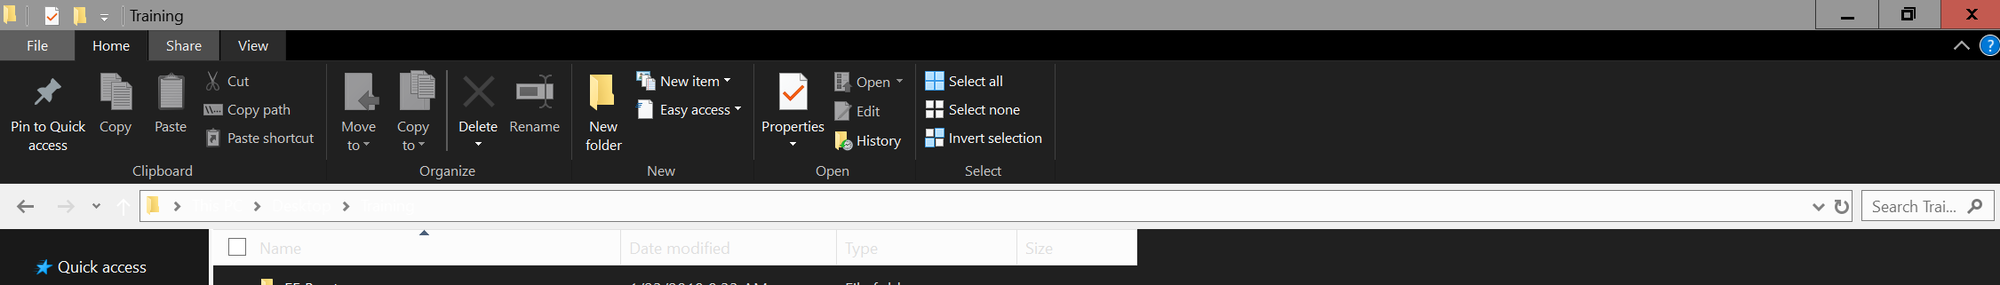 File Explorer looks extremely weird now, with black text on black background and white... aa7c7ebf-d1df-4efc-bf91-c5c5a20ad91c?upload=true.png